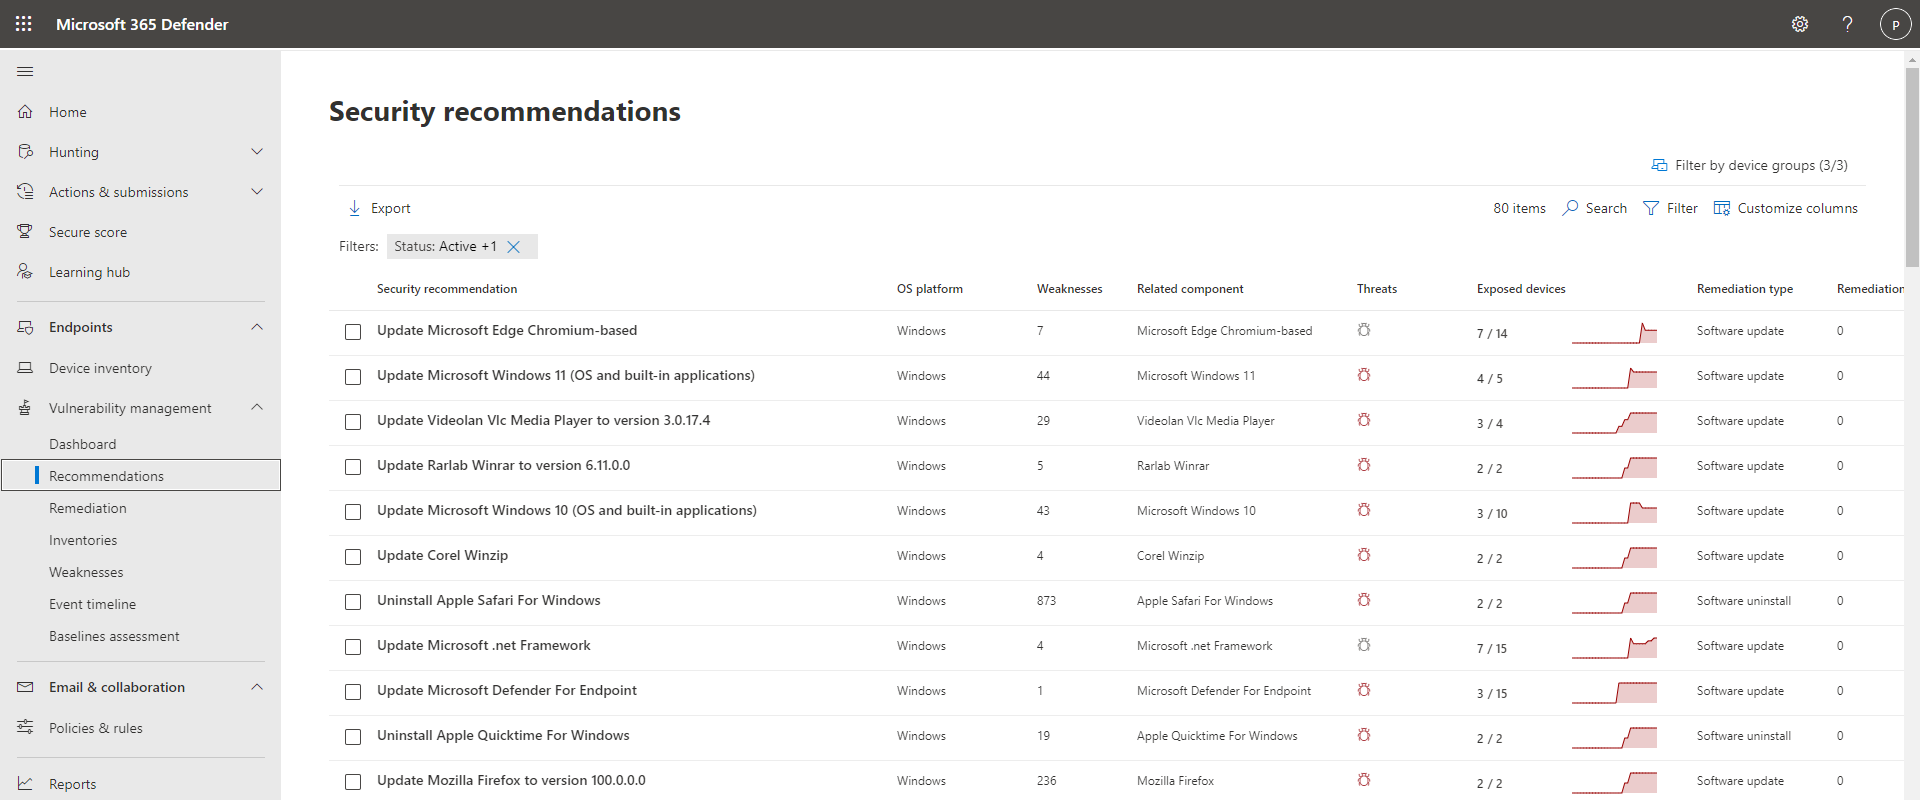 Screenshot of the security recommendations landing page.